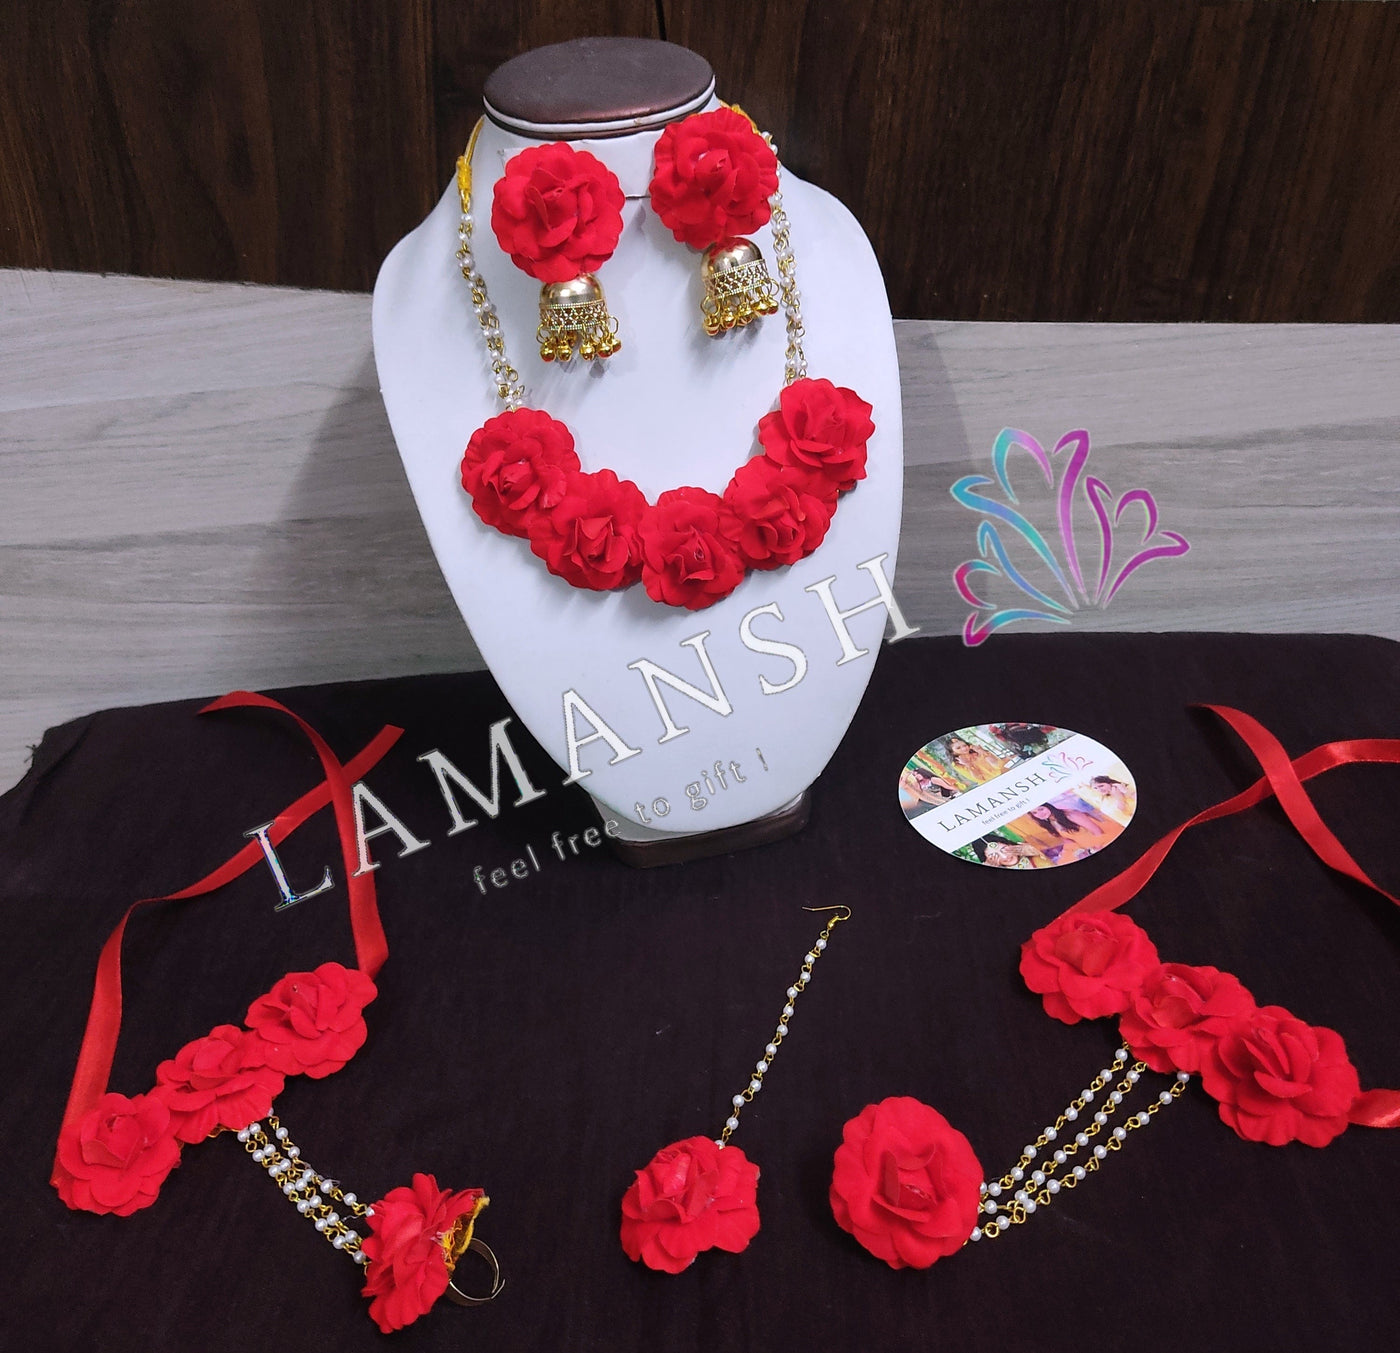 Lamansh latest floral set 1 Necklace, 2 Jhumki Earrings ,1 Maangtika & 2 Bracelet attached with ring / Red LAMANSH® Bridal Collection Red Rose Jewellery Set with Jhumki earrings for Women & Girls / Haldi Set